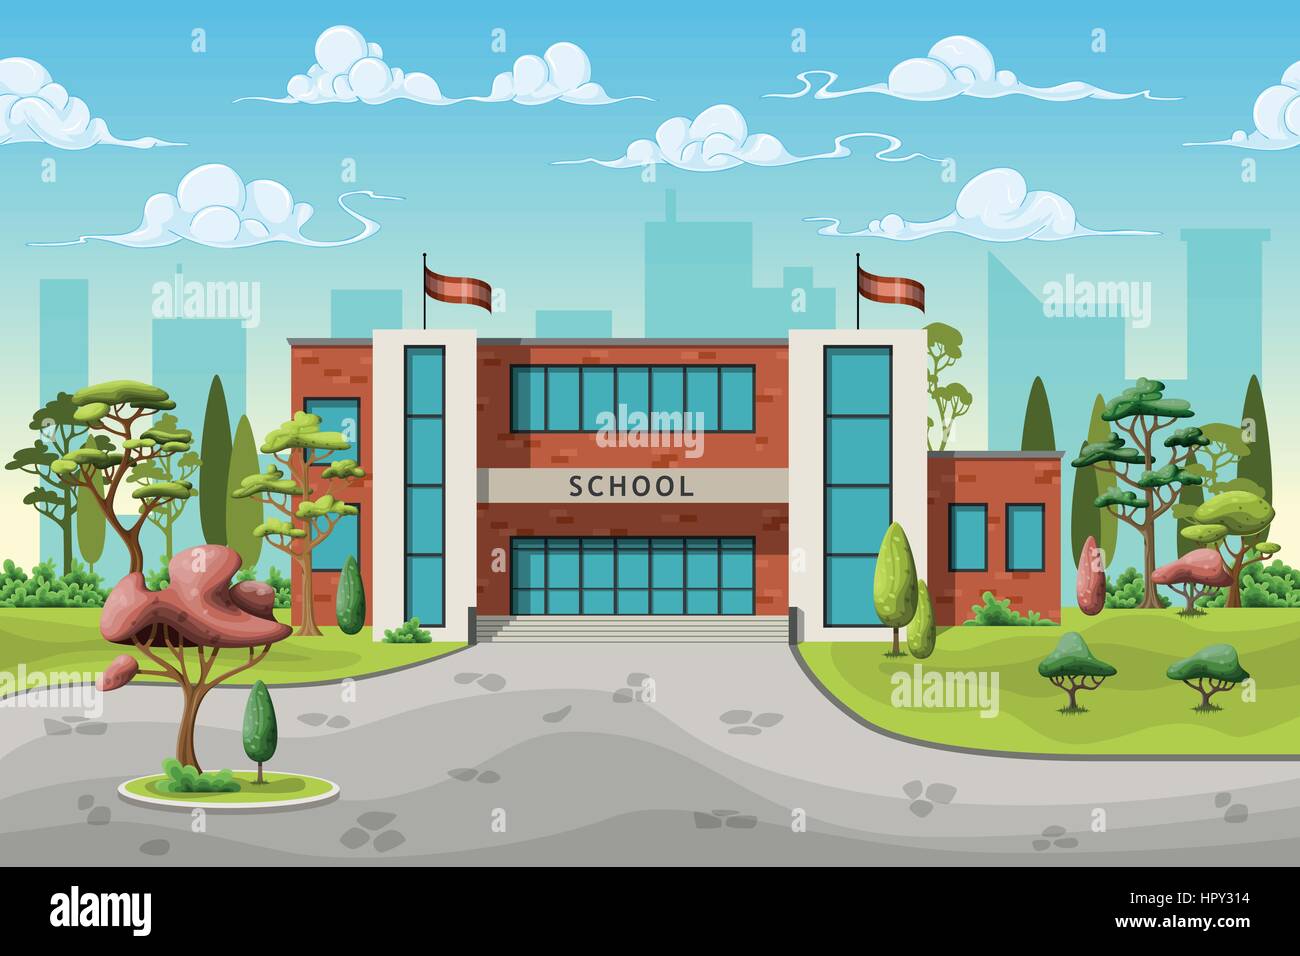 Illustration Of A School Building In Cartoon Style Stock Vector Image